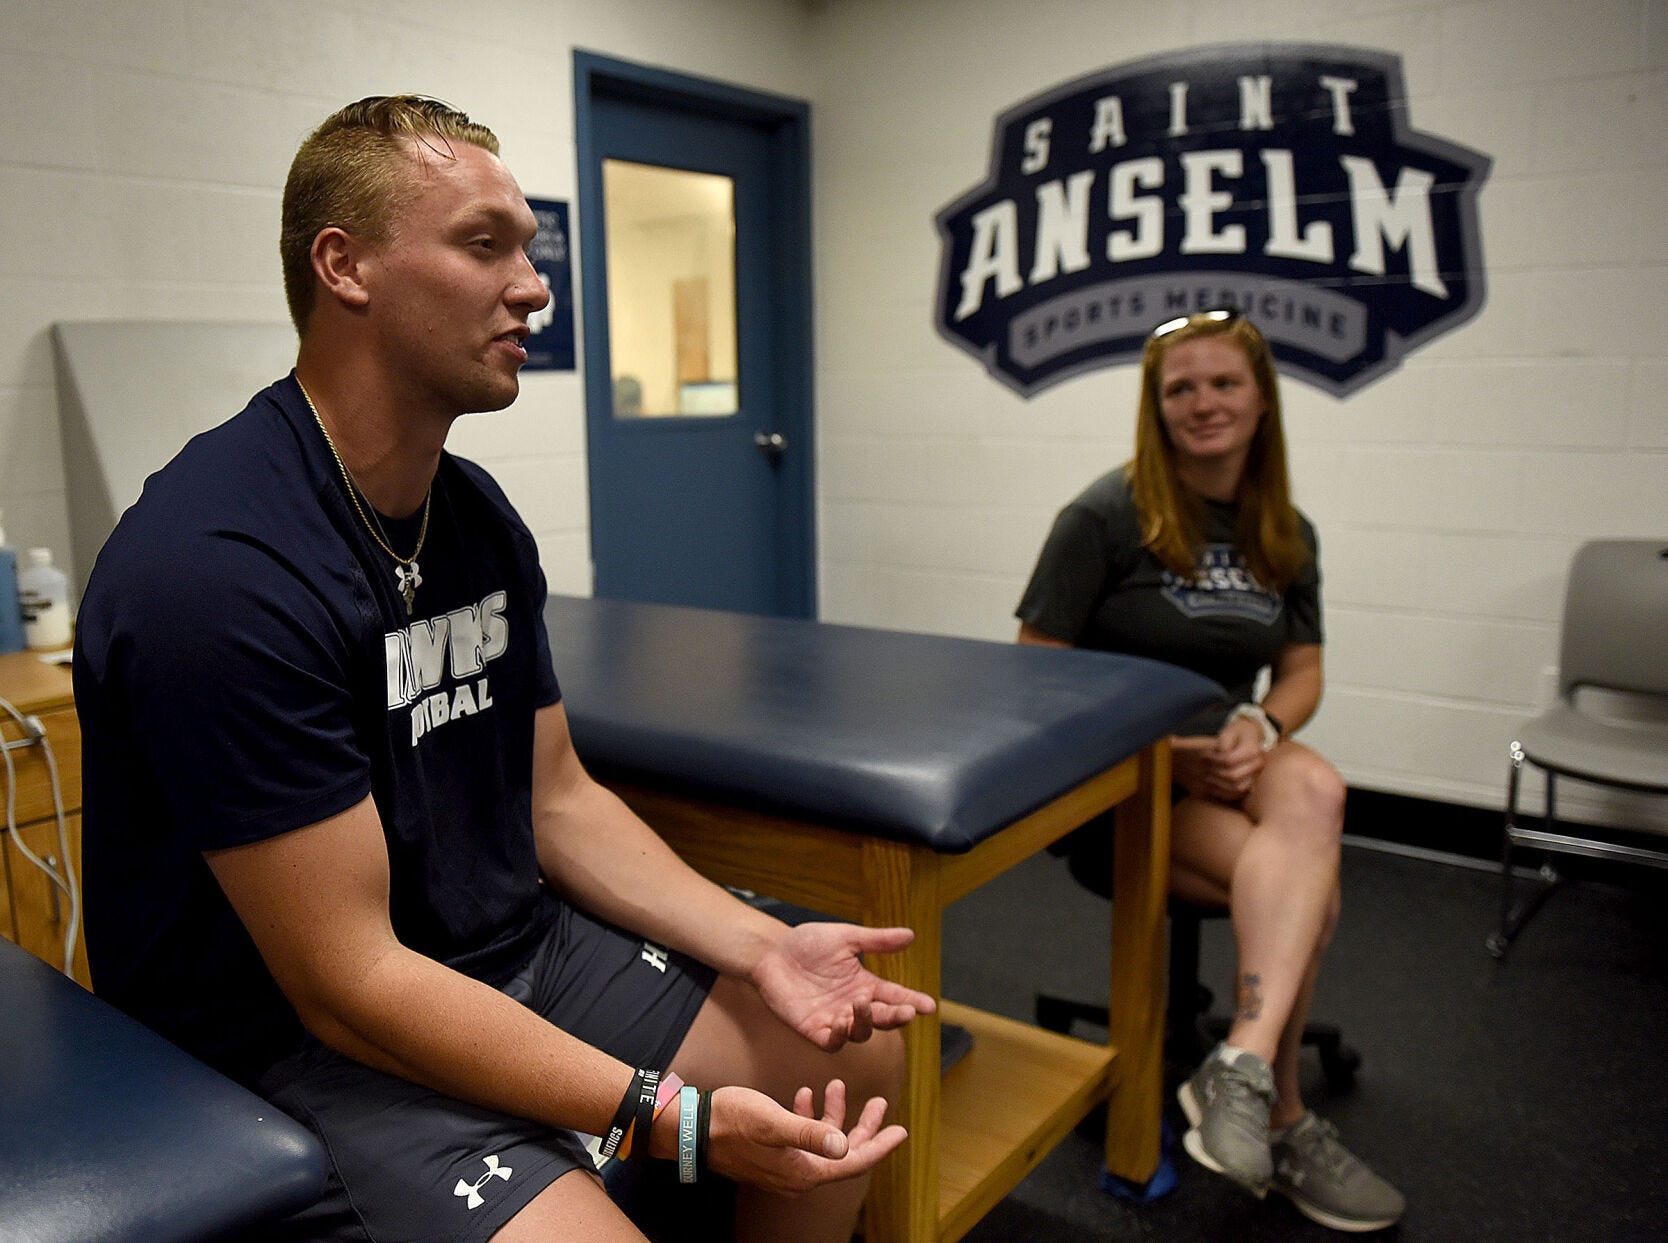 Football player Cillian Davis and Director of Sports Medicine and Athletic Performance Alyssa DeCotis speak with a reporter in the training room at St. Anselm College on Aug. 2, 2022.